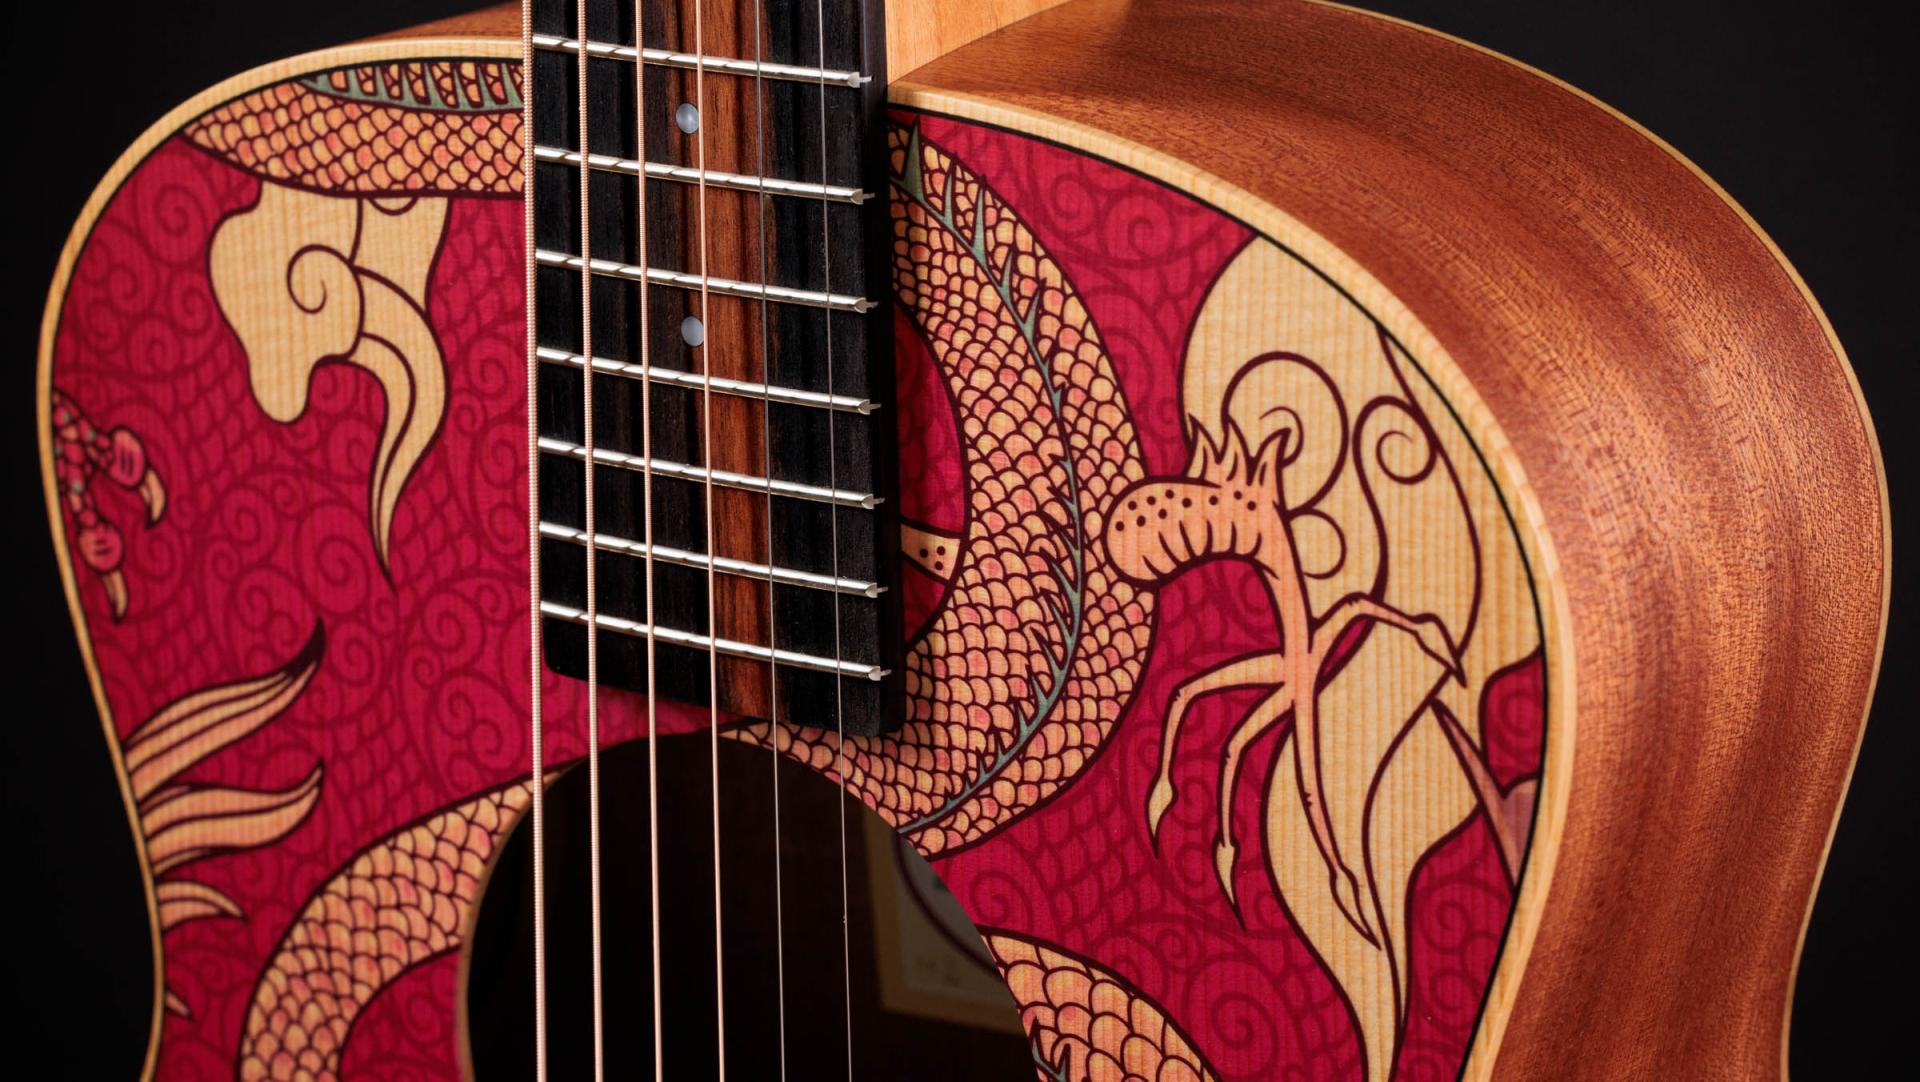 Taylor GS Mini-e Special Edition, Year of the Dragon